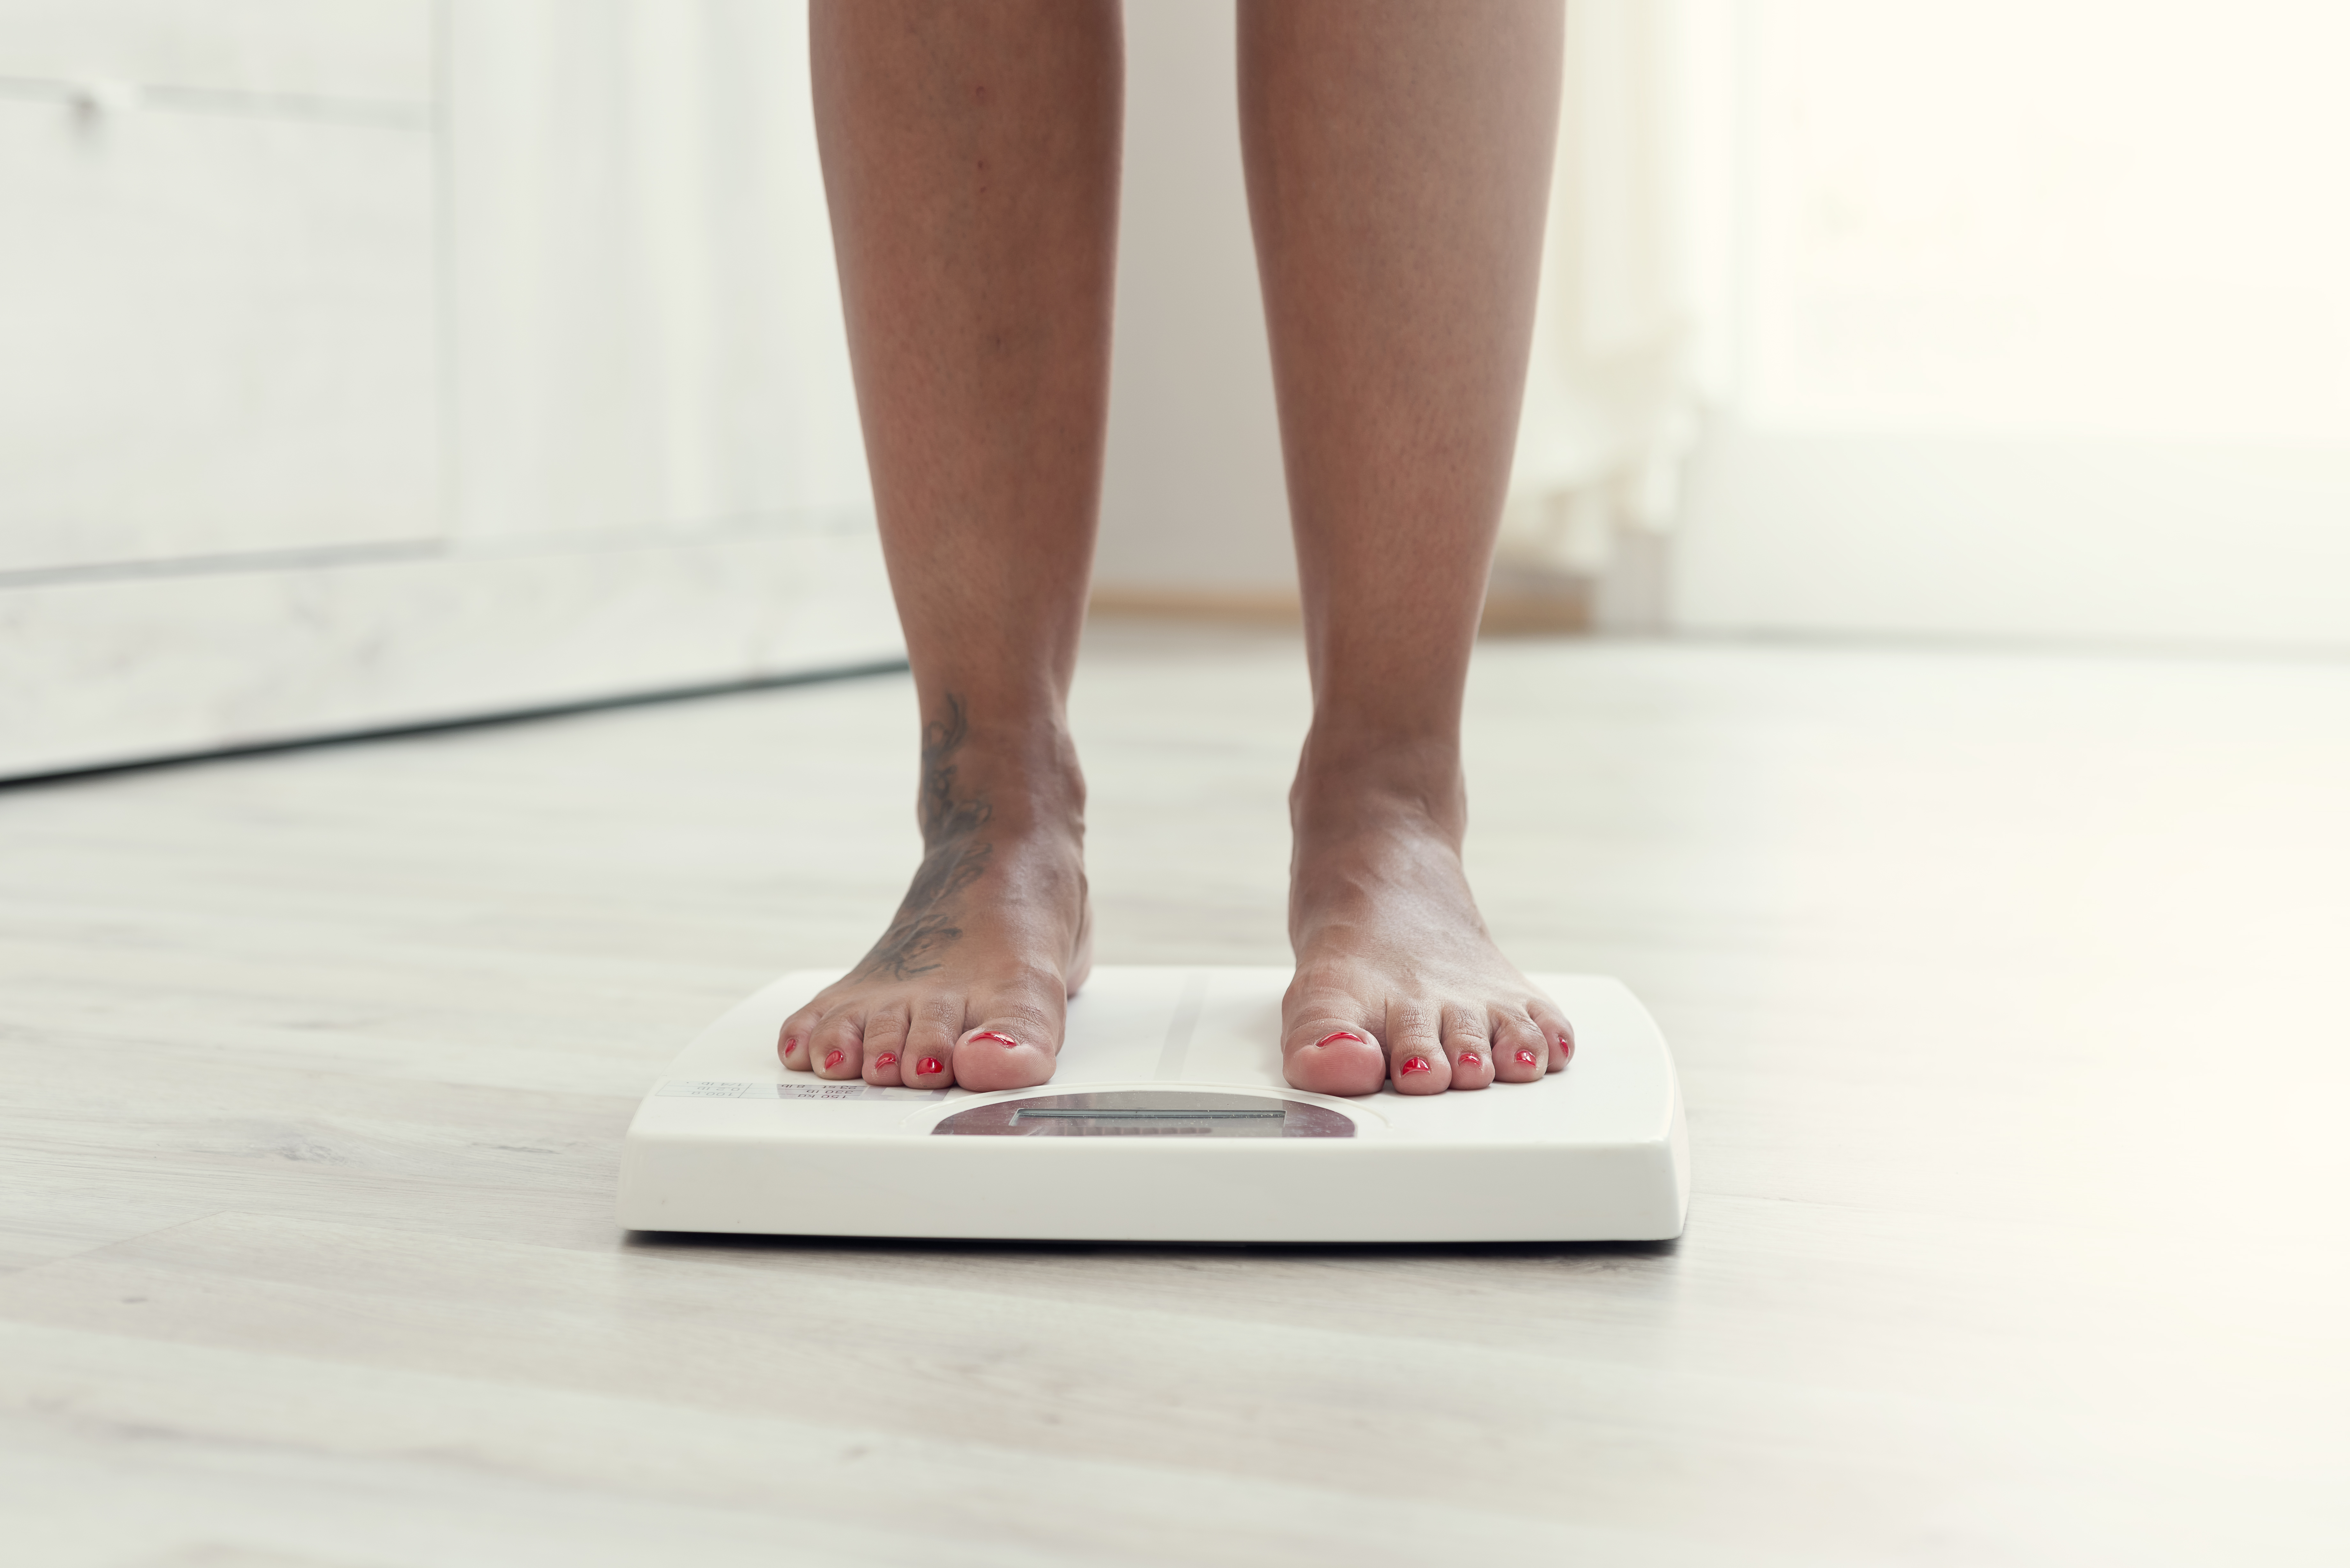 How to Get the Most Accurate Reading on a Digital Bathroom Scale